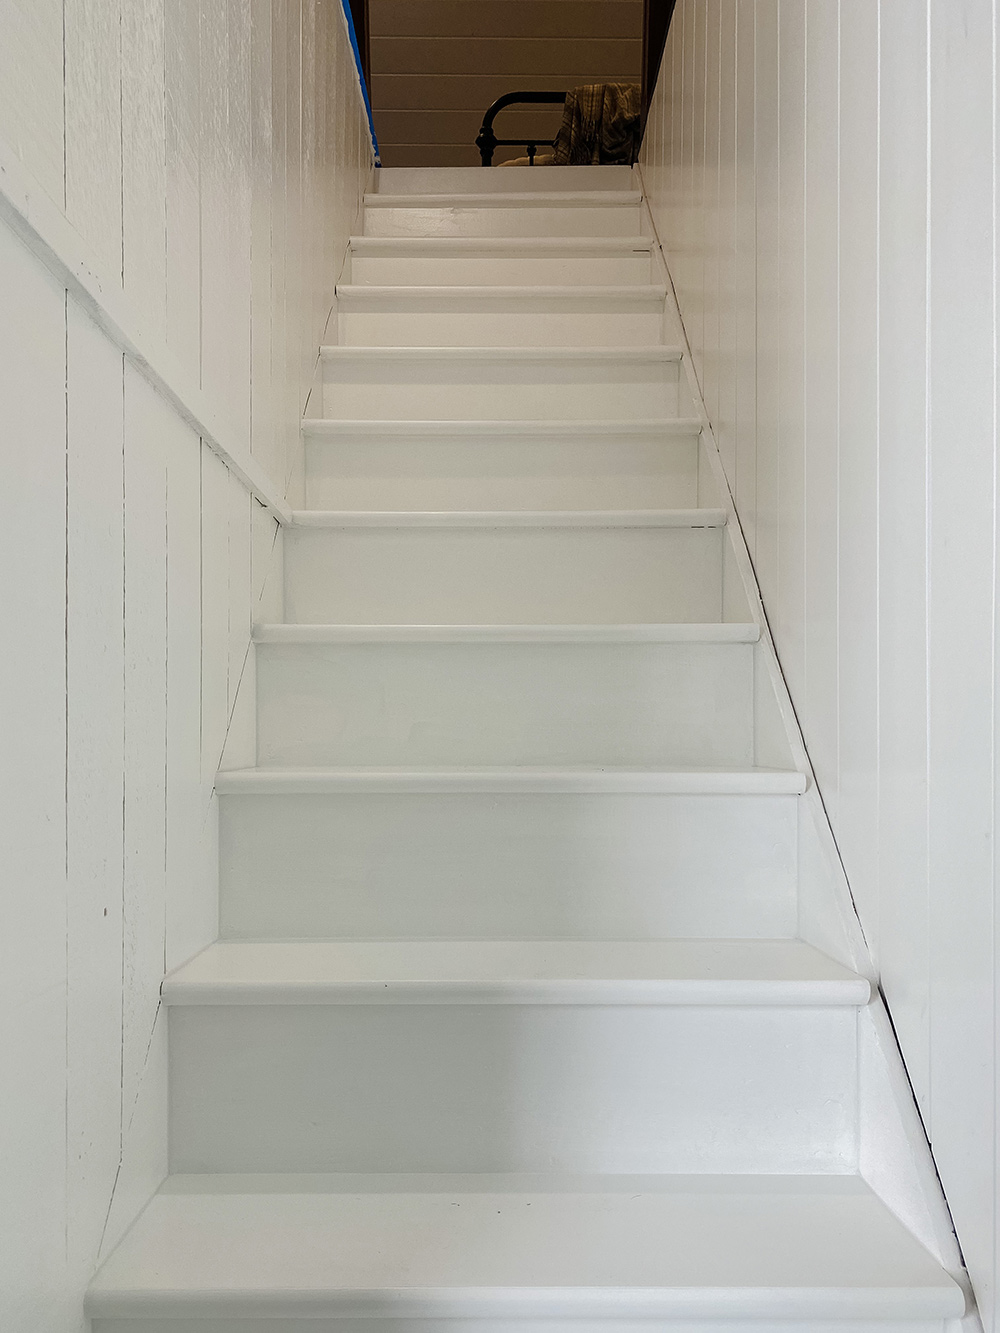 Staircase with fresh coat of white paint with white painted walls.